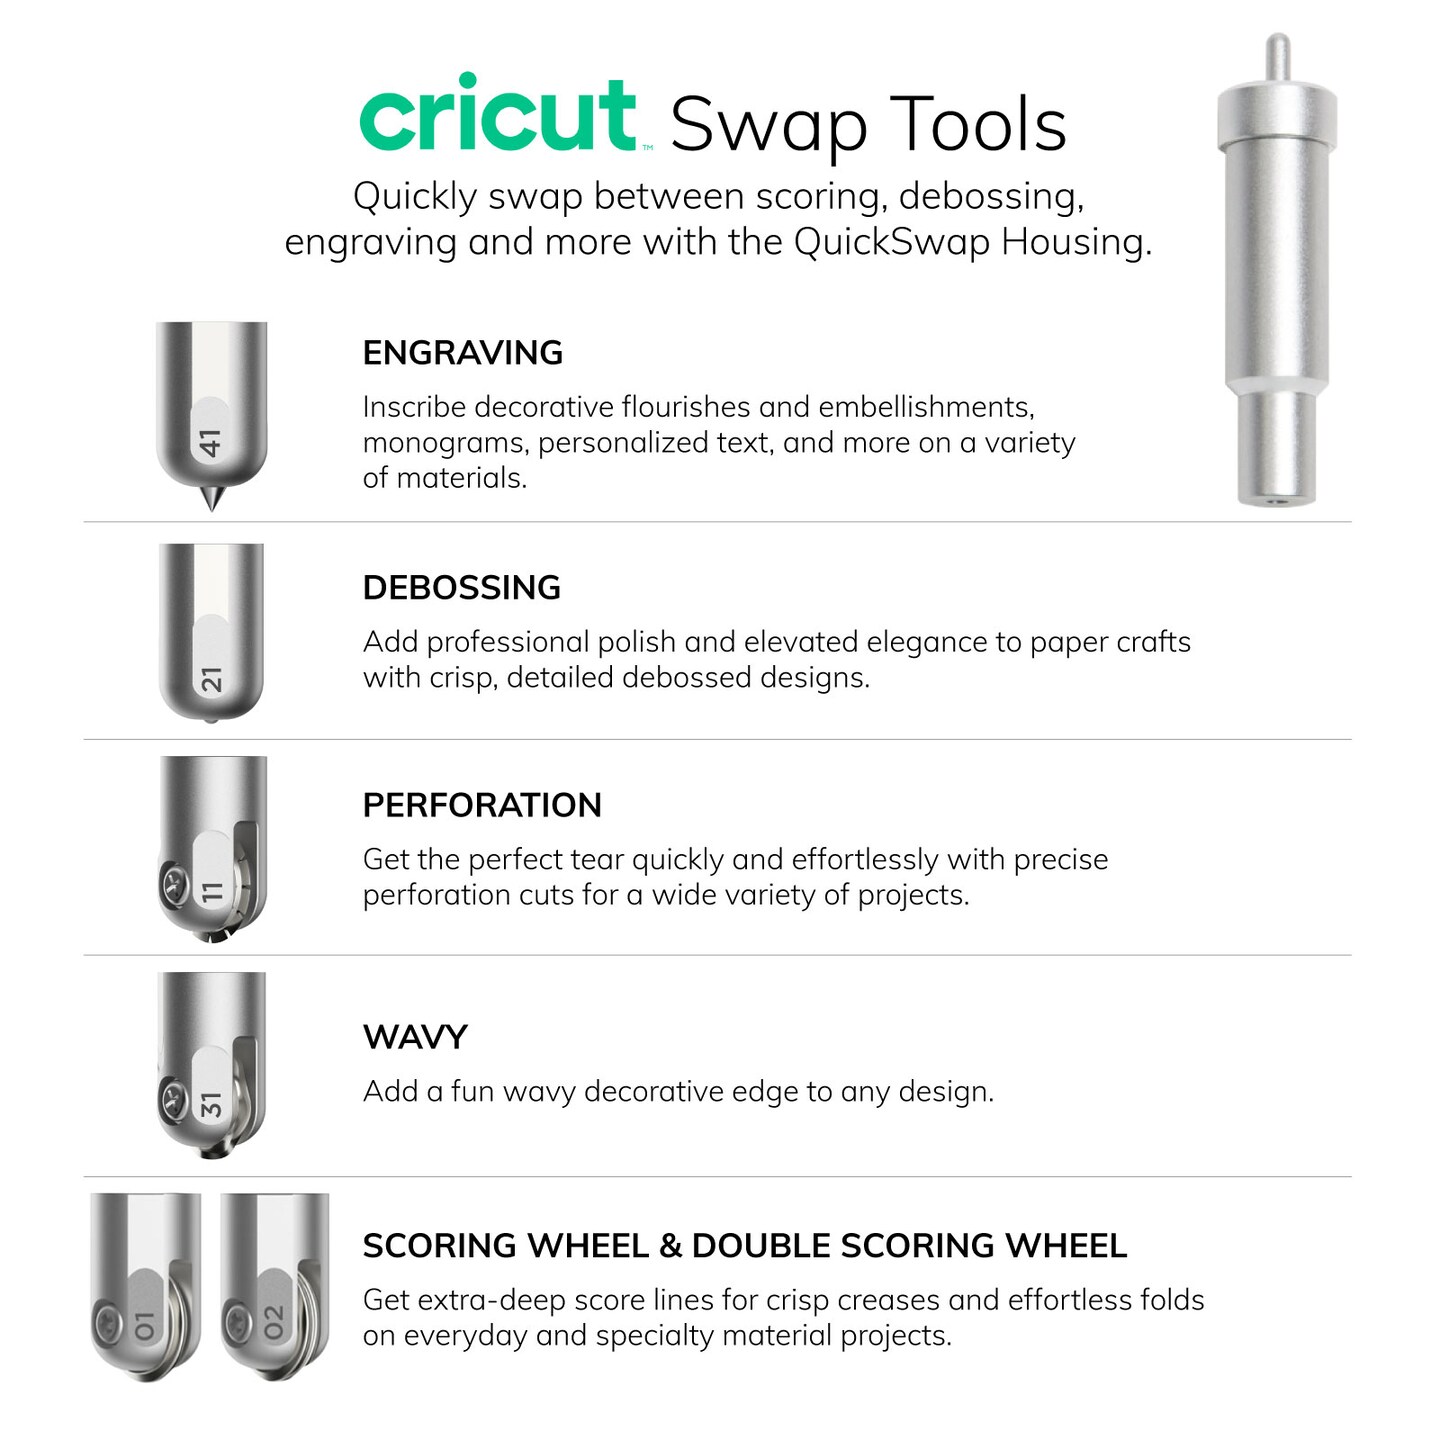  Cricut Maker QuickSwap Housing with Fine Debossing Tip 21 and  Engraving Tip 41 Blade Bundle - Create Dimensional Cards and Gift Tags,  Engrave Glass, Leather, Aluminum and Acrylic, for Cricut Maker 3